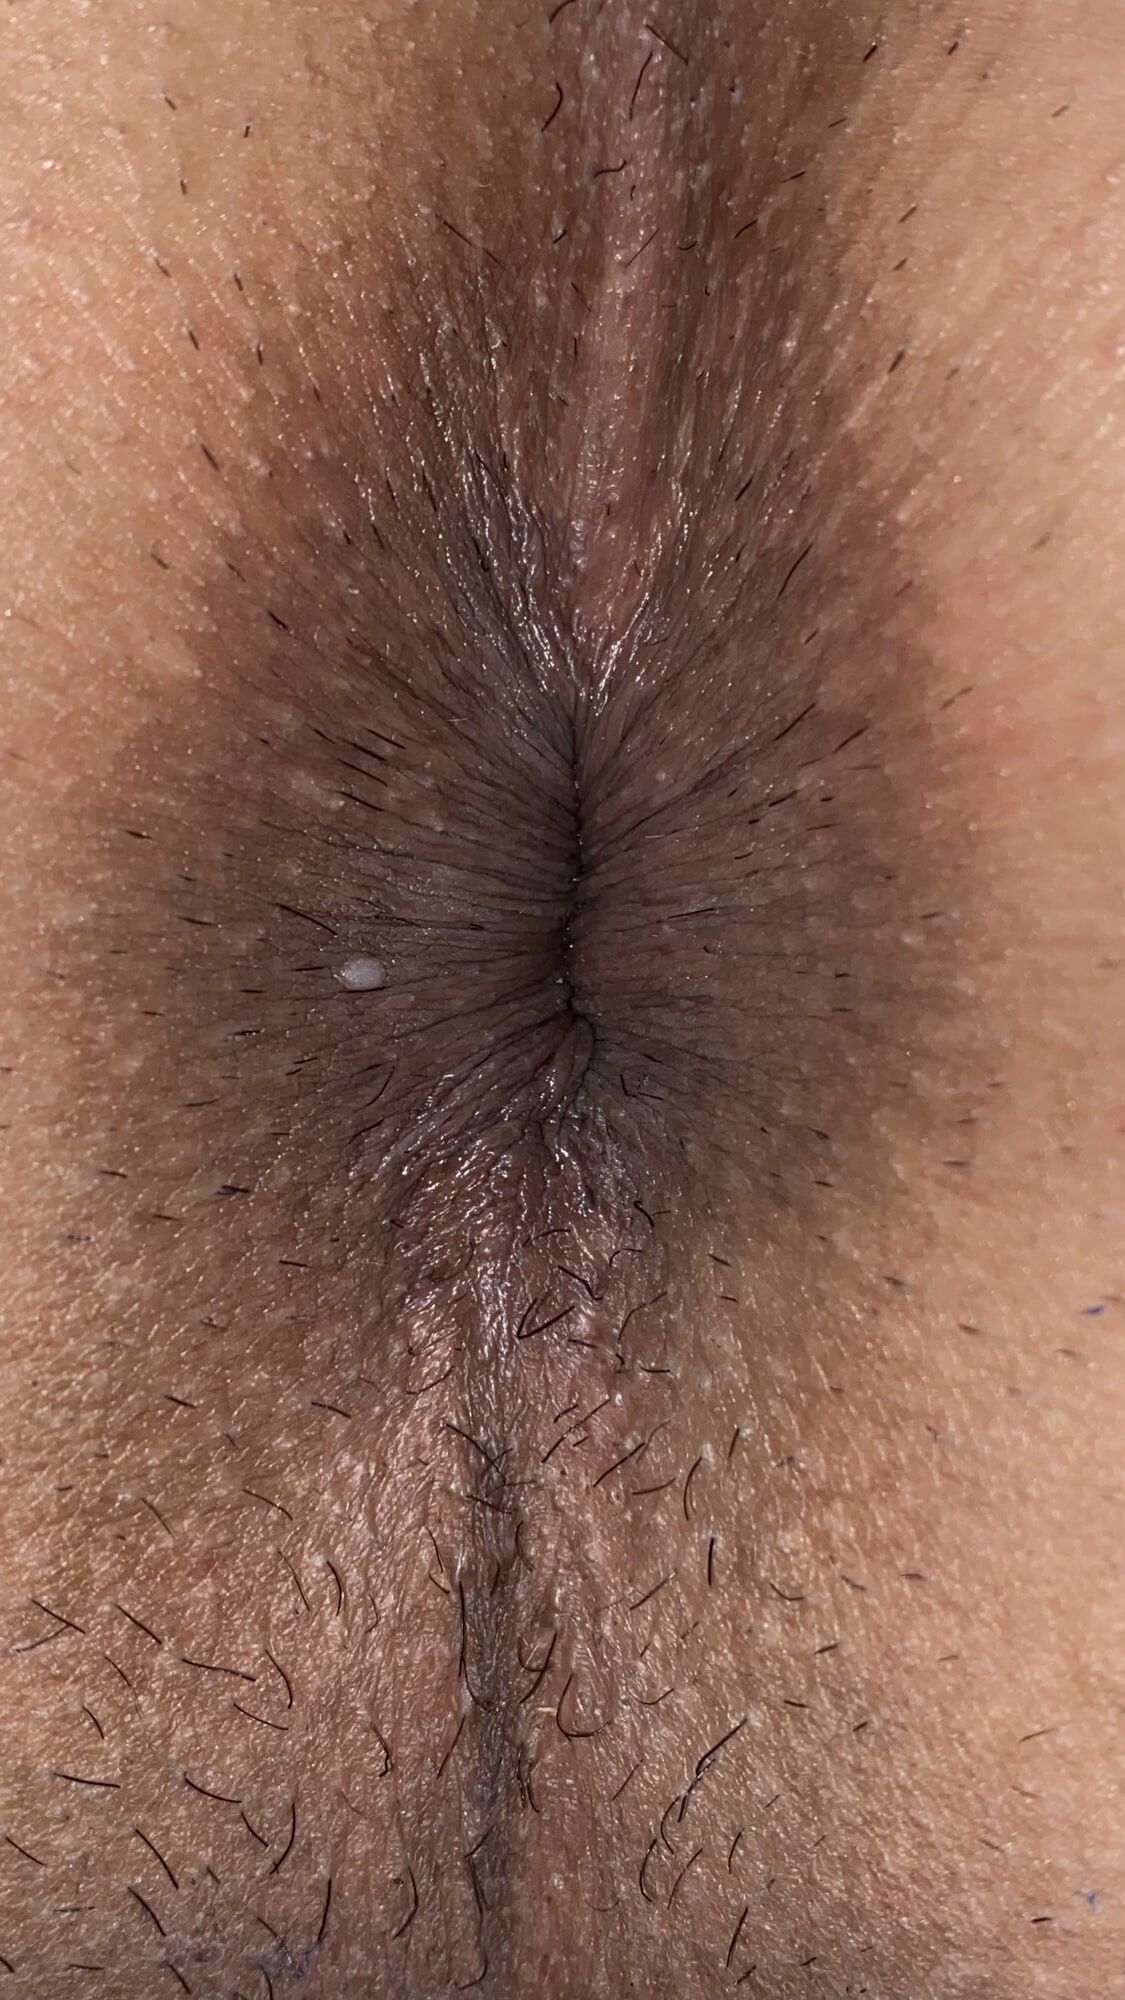 An image of my anus that is clear to every single wrinkle #15